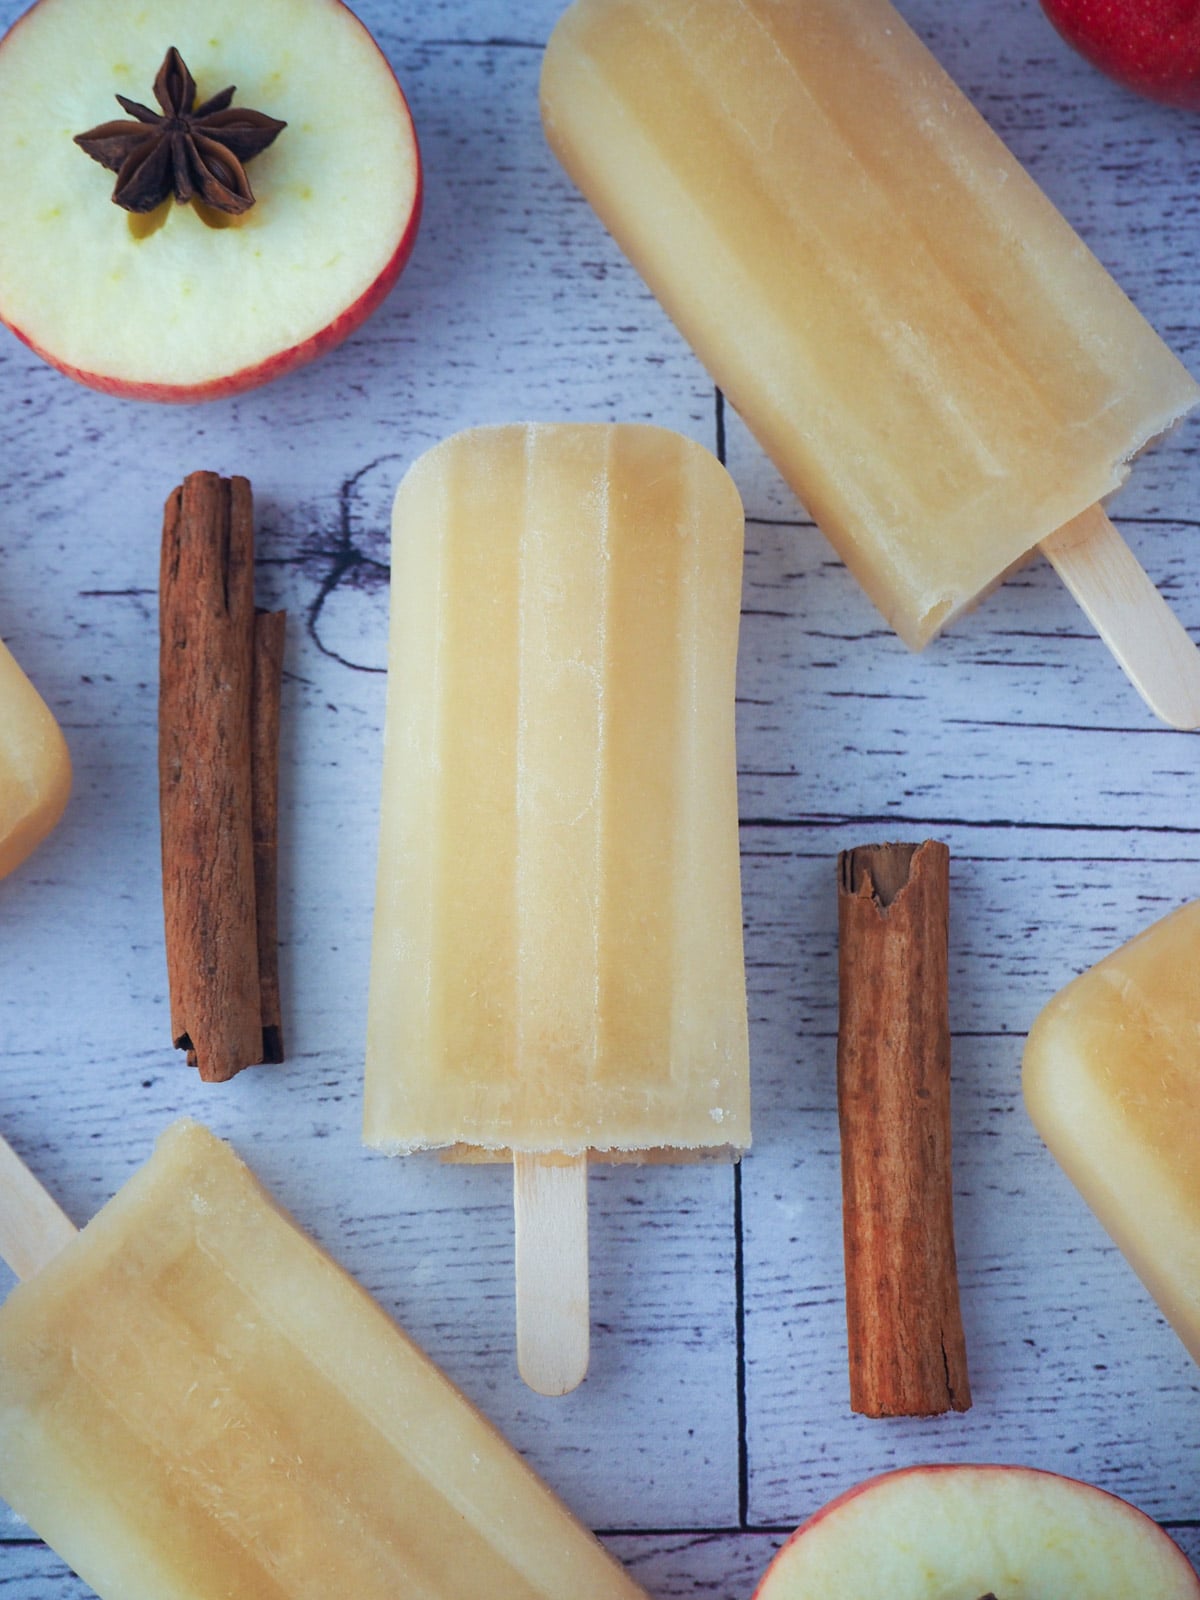 Apple cider popsicles with spices and fresh apples.